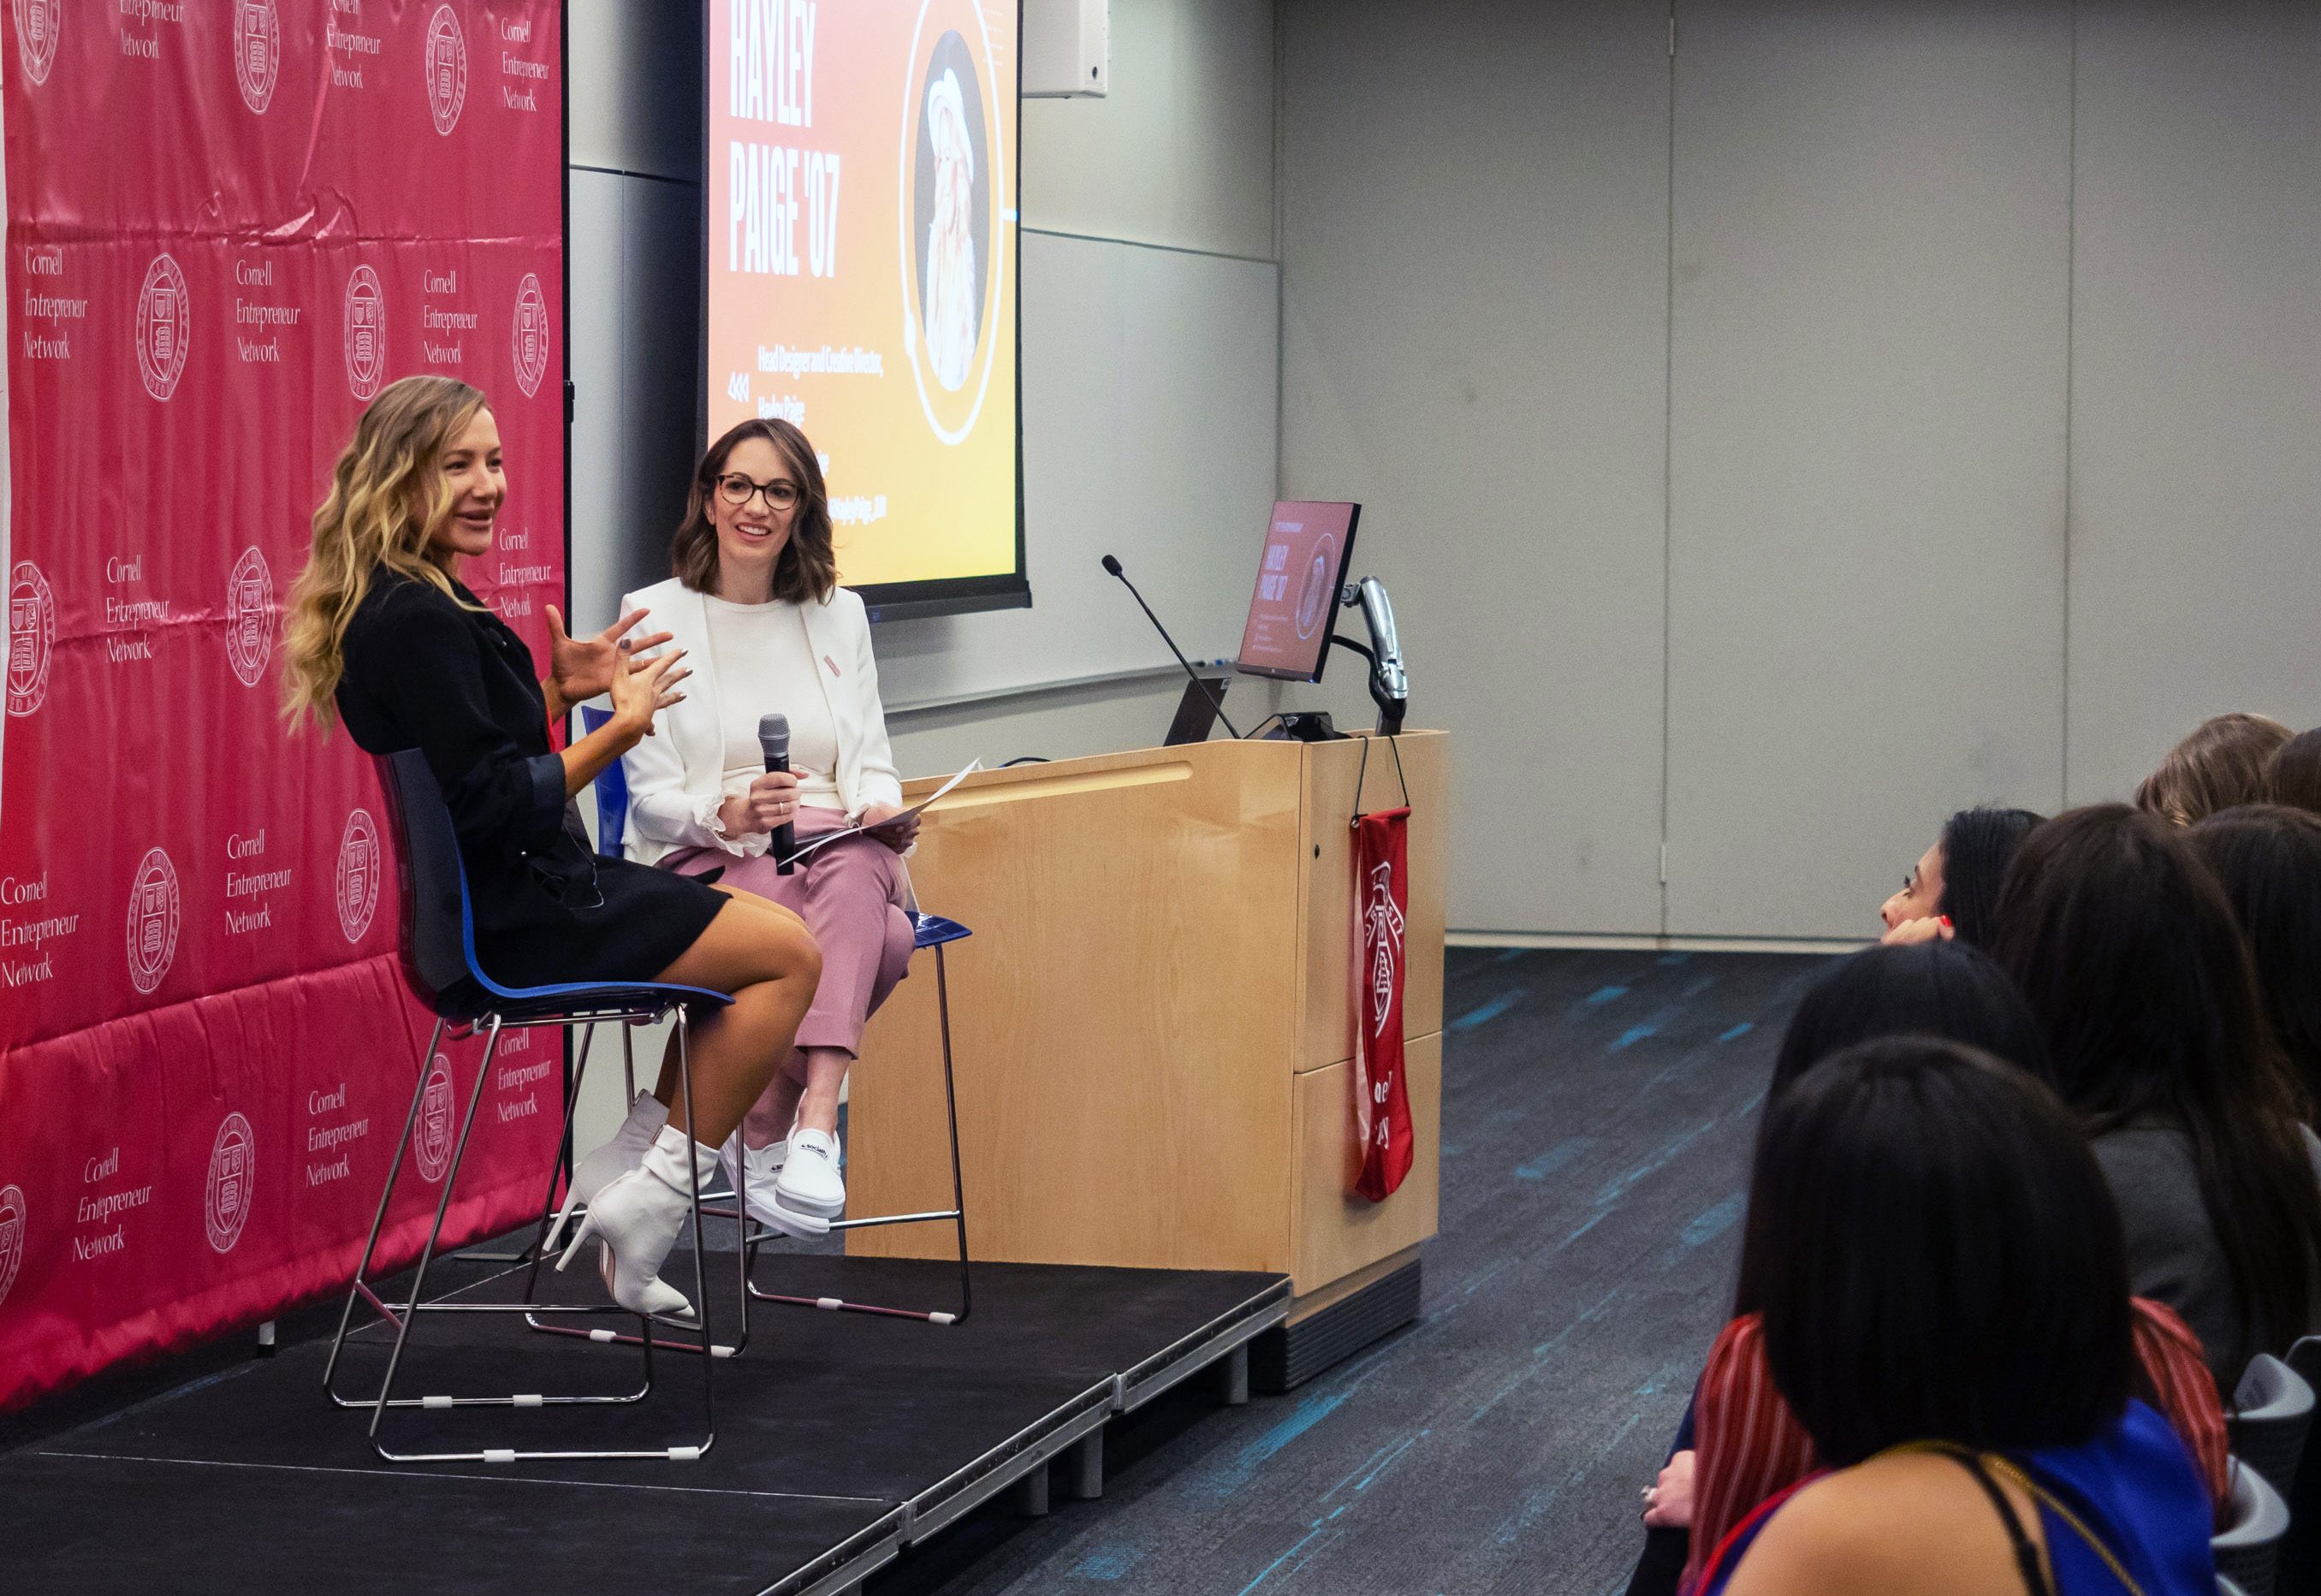 Hayley Paige ’07, head designer and creative director, Hayley Paige, told moderator Stephanie Cartin ’06 about how her dream of becoming a bridal designer became a reality.